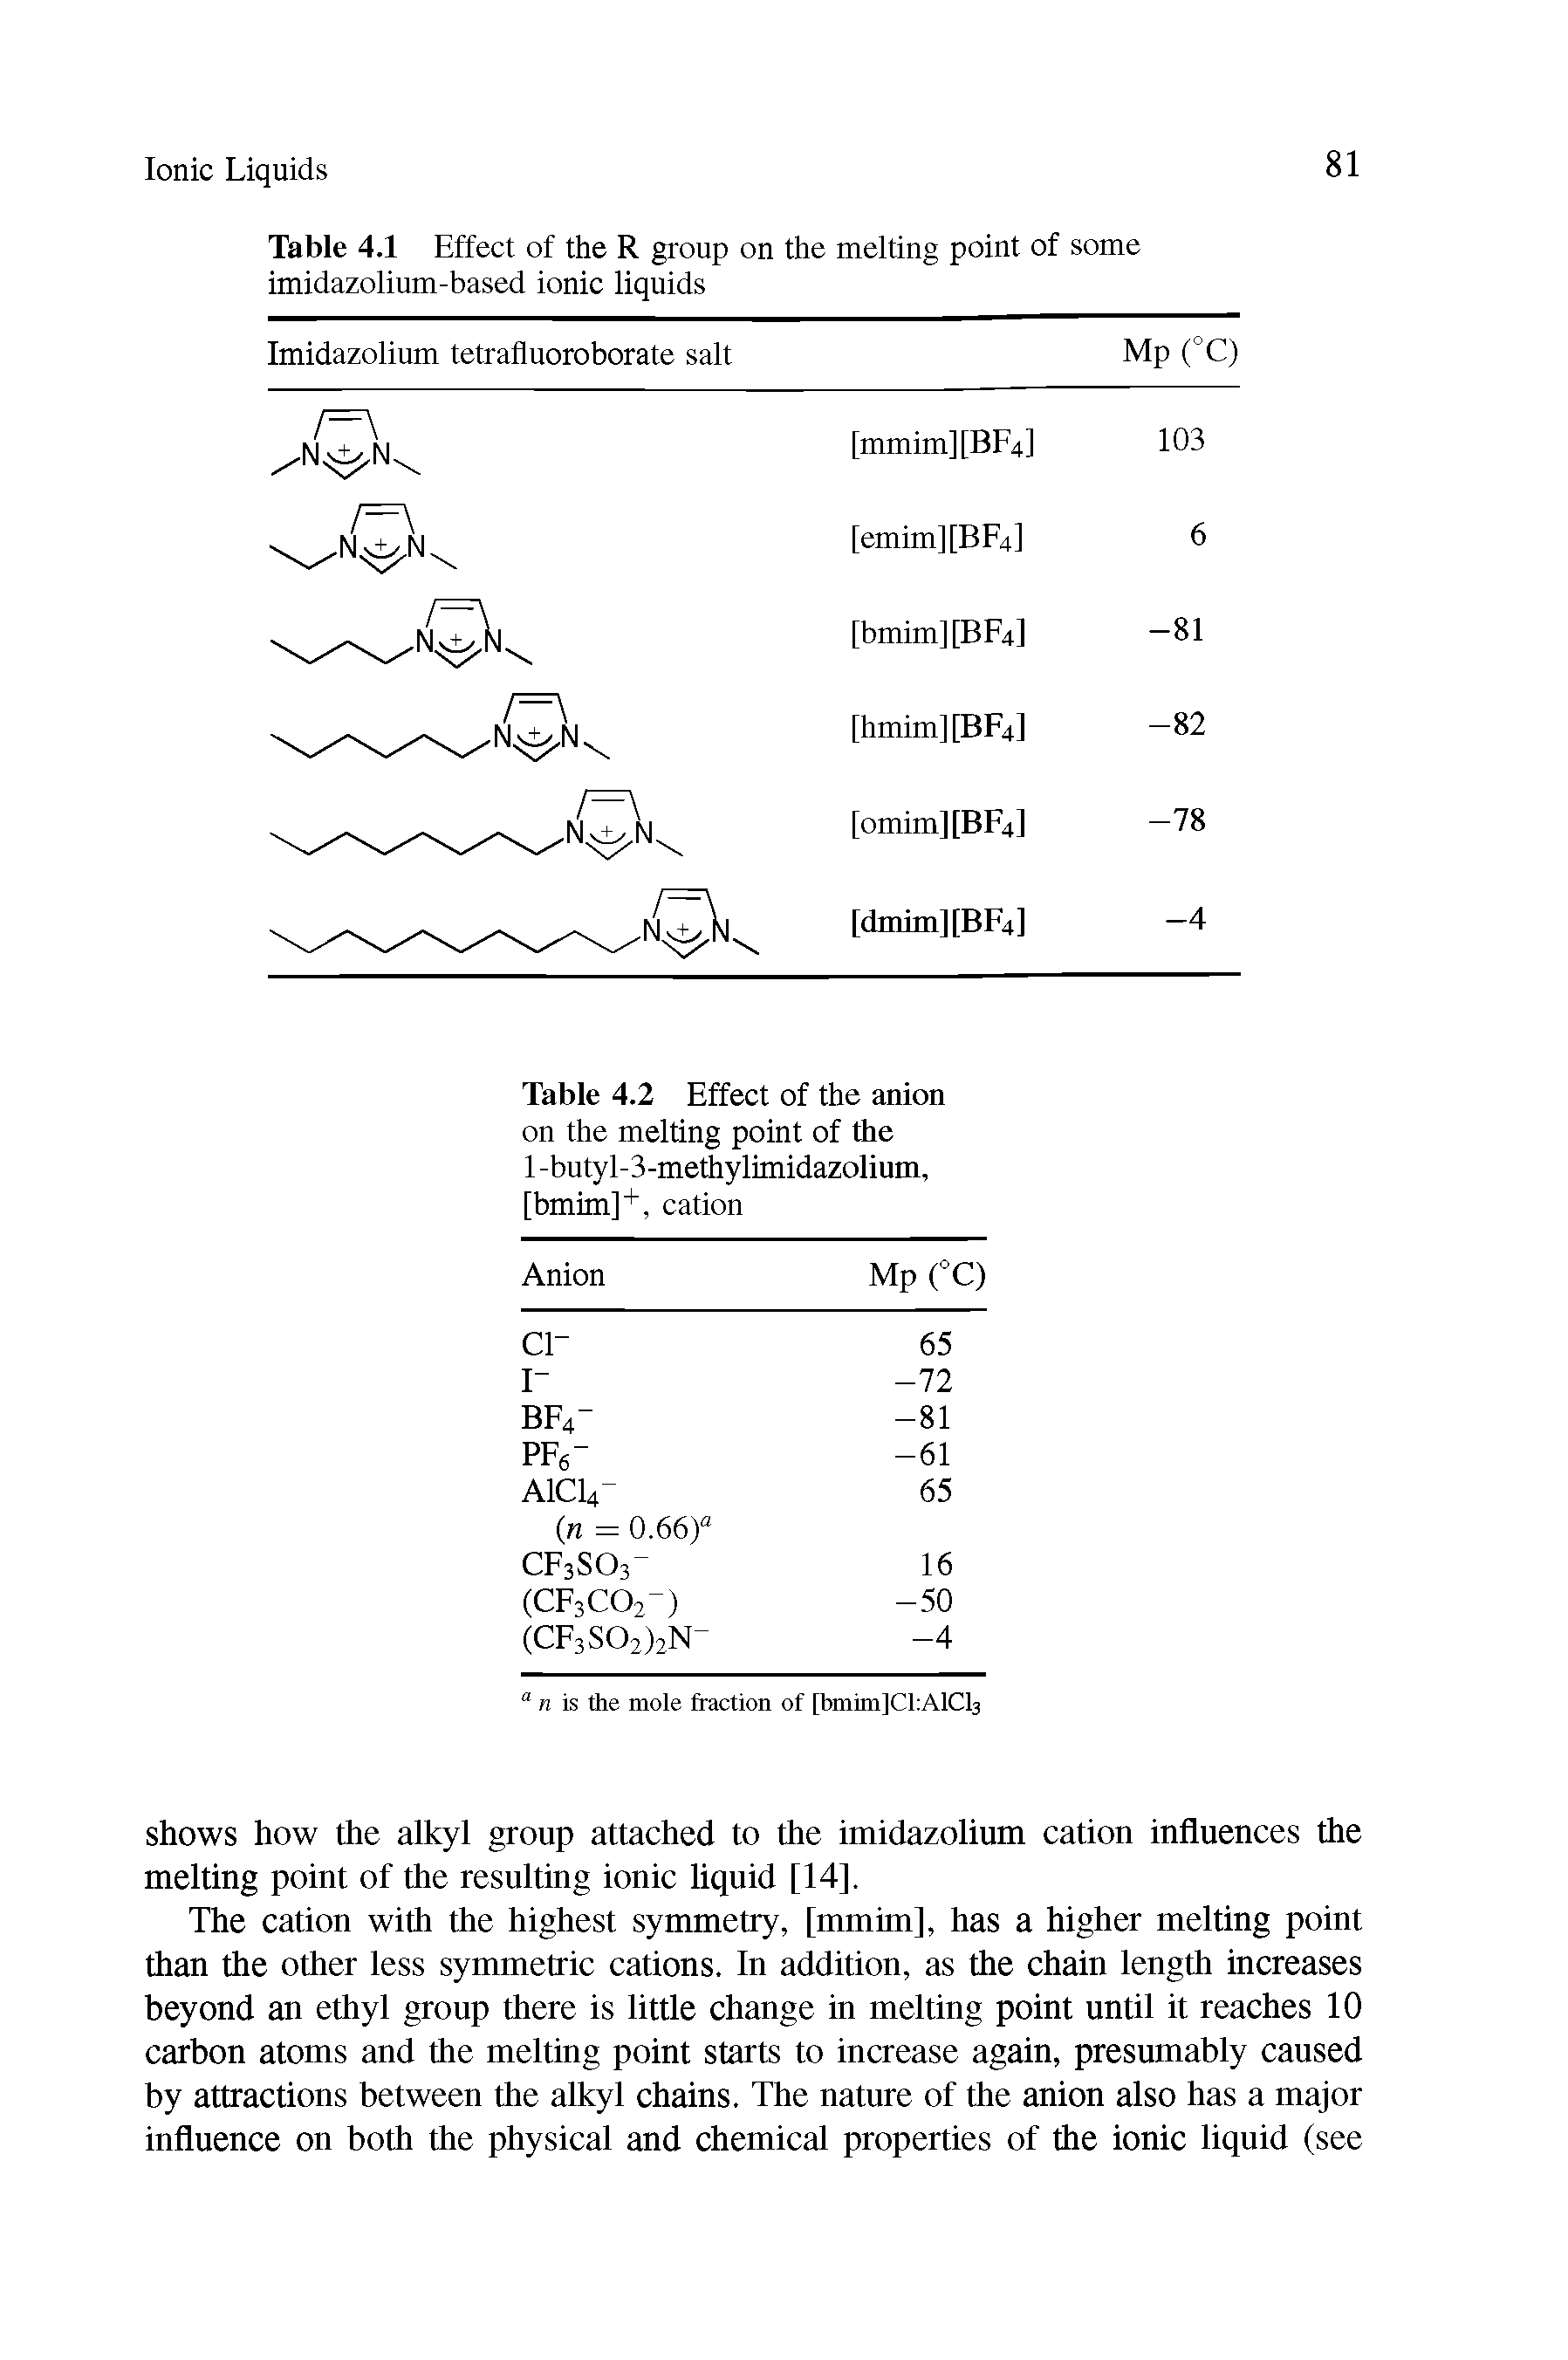 Table 4.1 Effect of the R group on the melting point of some imidazolium-based ionic liquids...